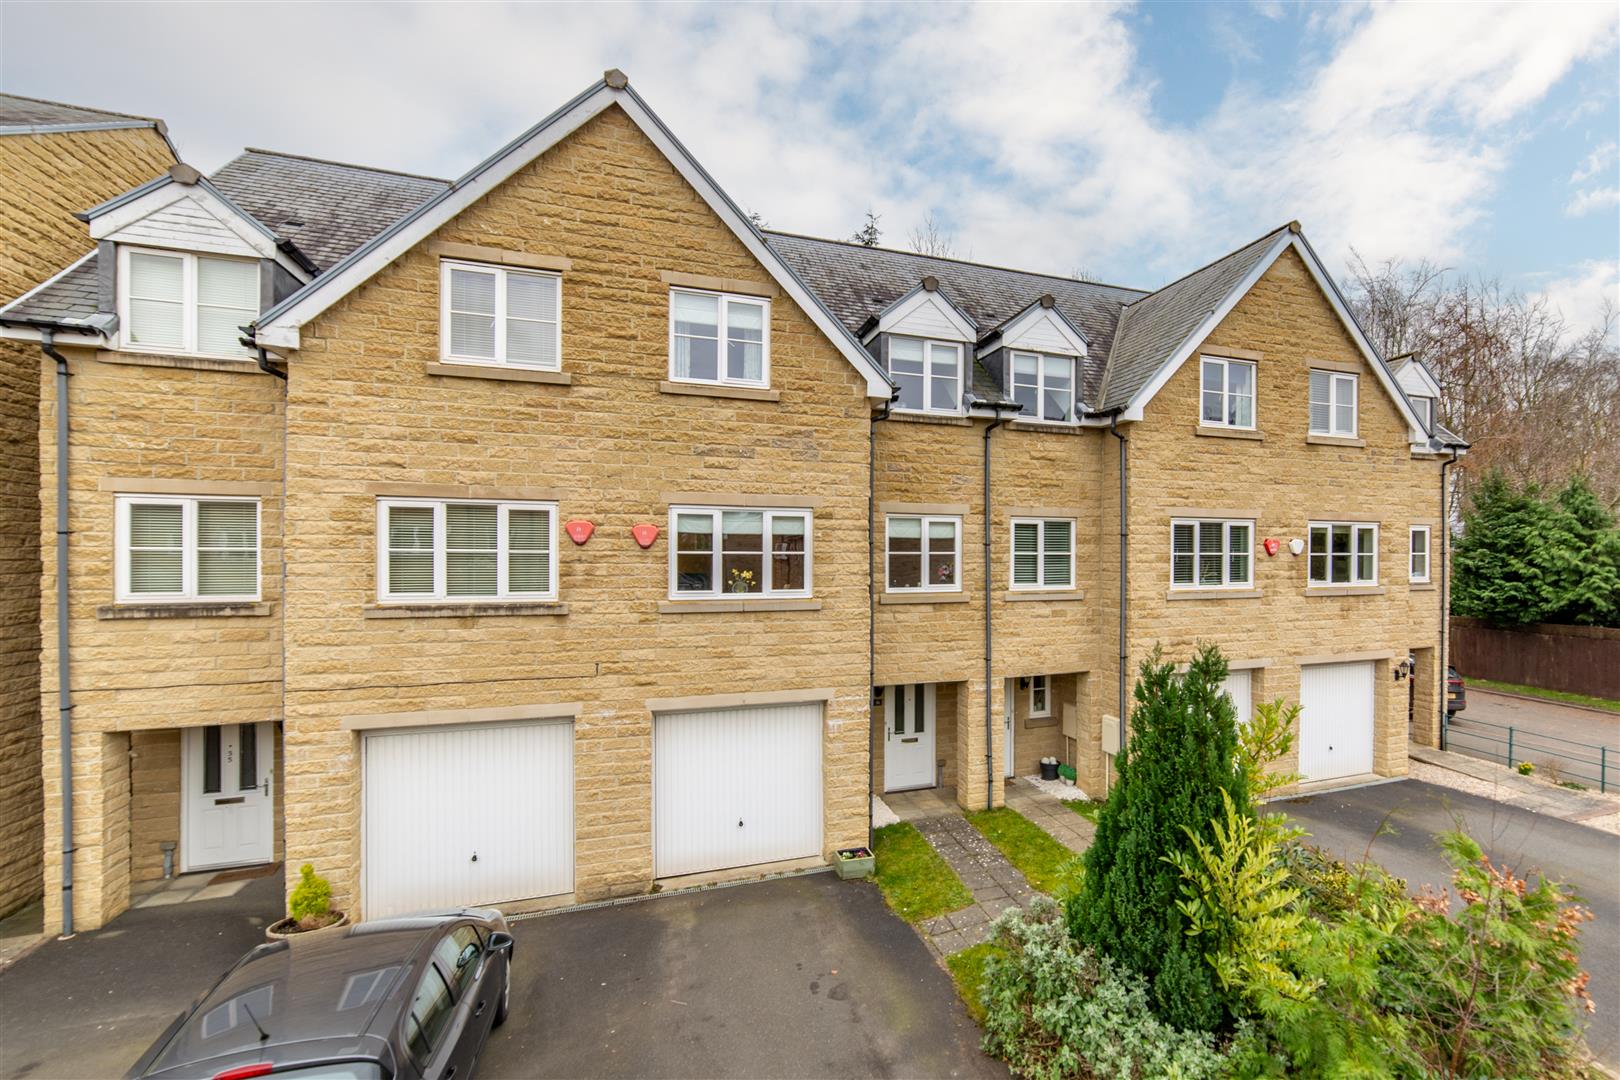 4 bed town house for sale in Southgate Mews, Morpeth 0